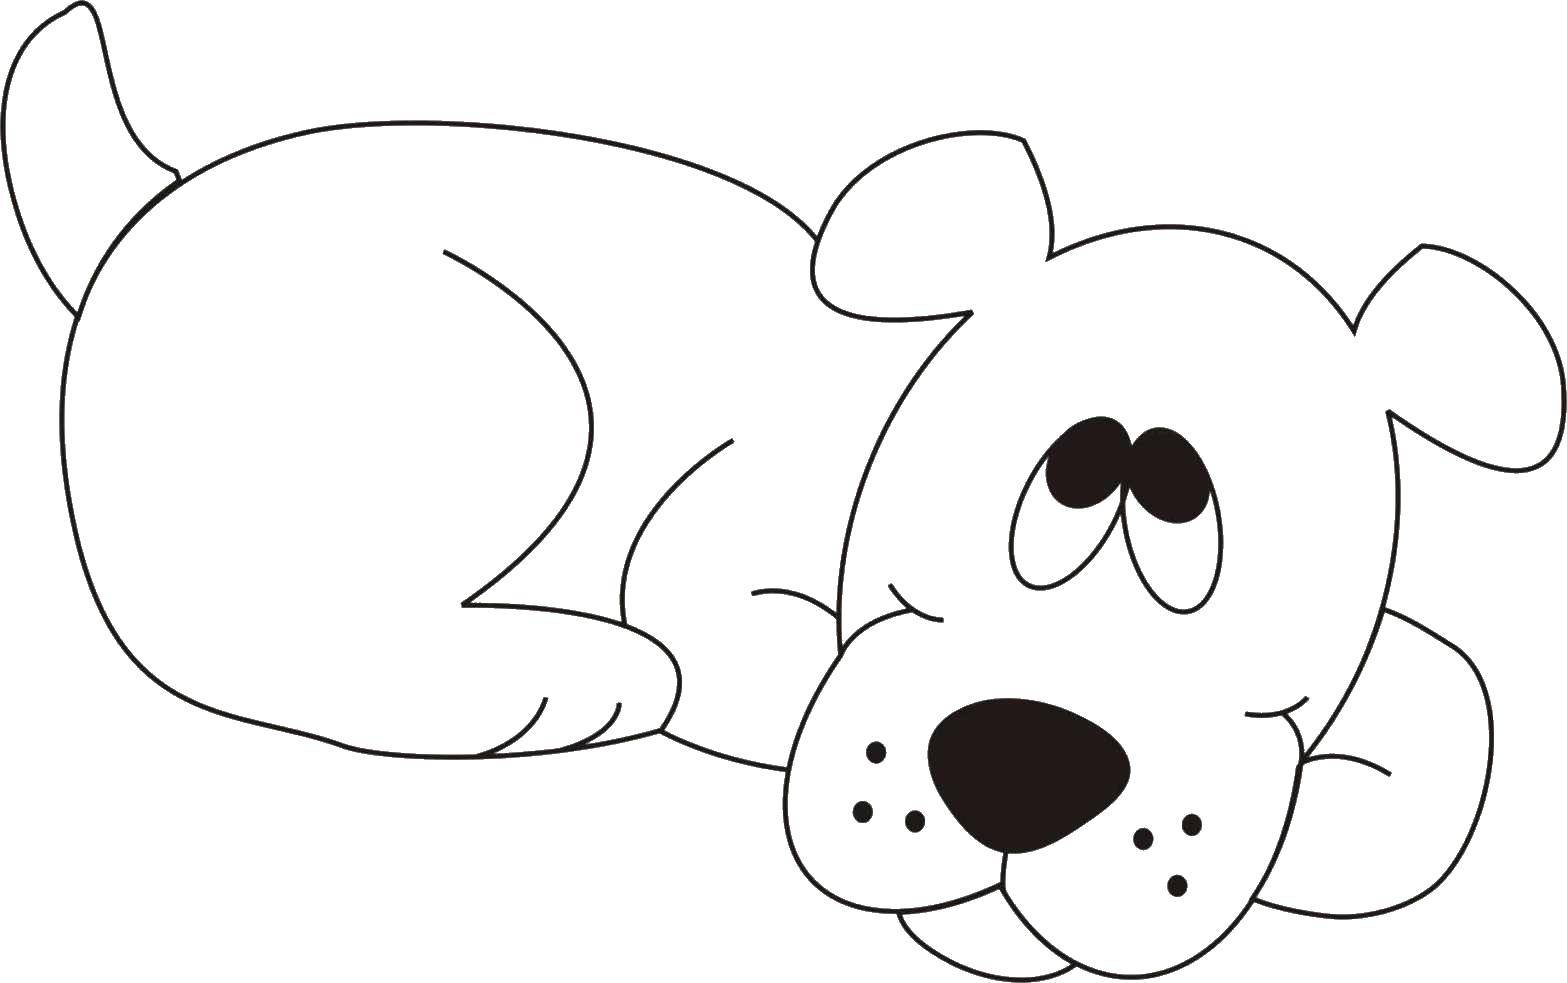 Coloring The dog lies. Category Pets allowed. Tags:  animals, dog, puppy, dog.